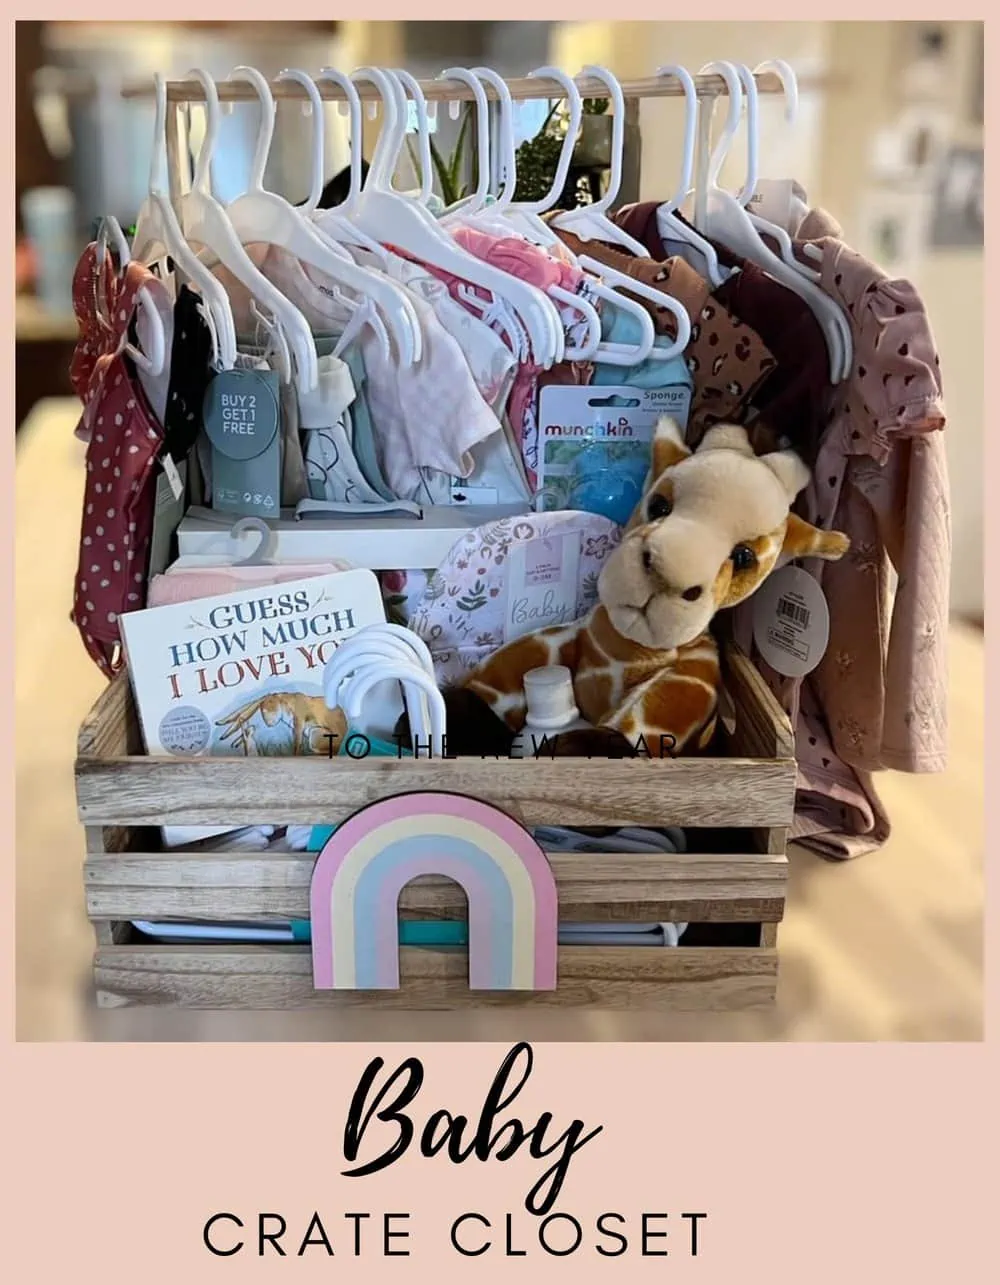 https://www.thriftynorthwestmom.com/wp-content/uploads/2022/09/Baby-Crate-Closet-for-Baby-Shower-Gift.webp